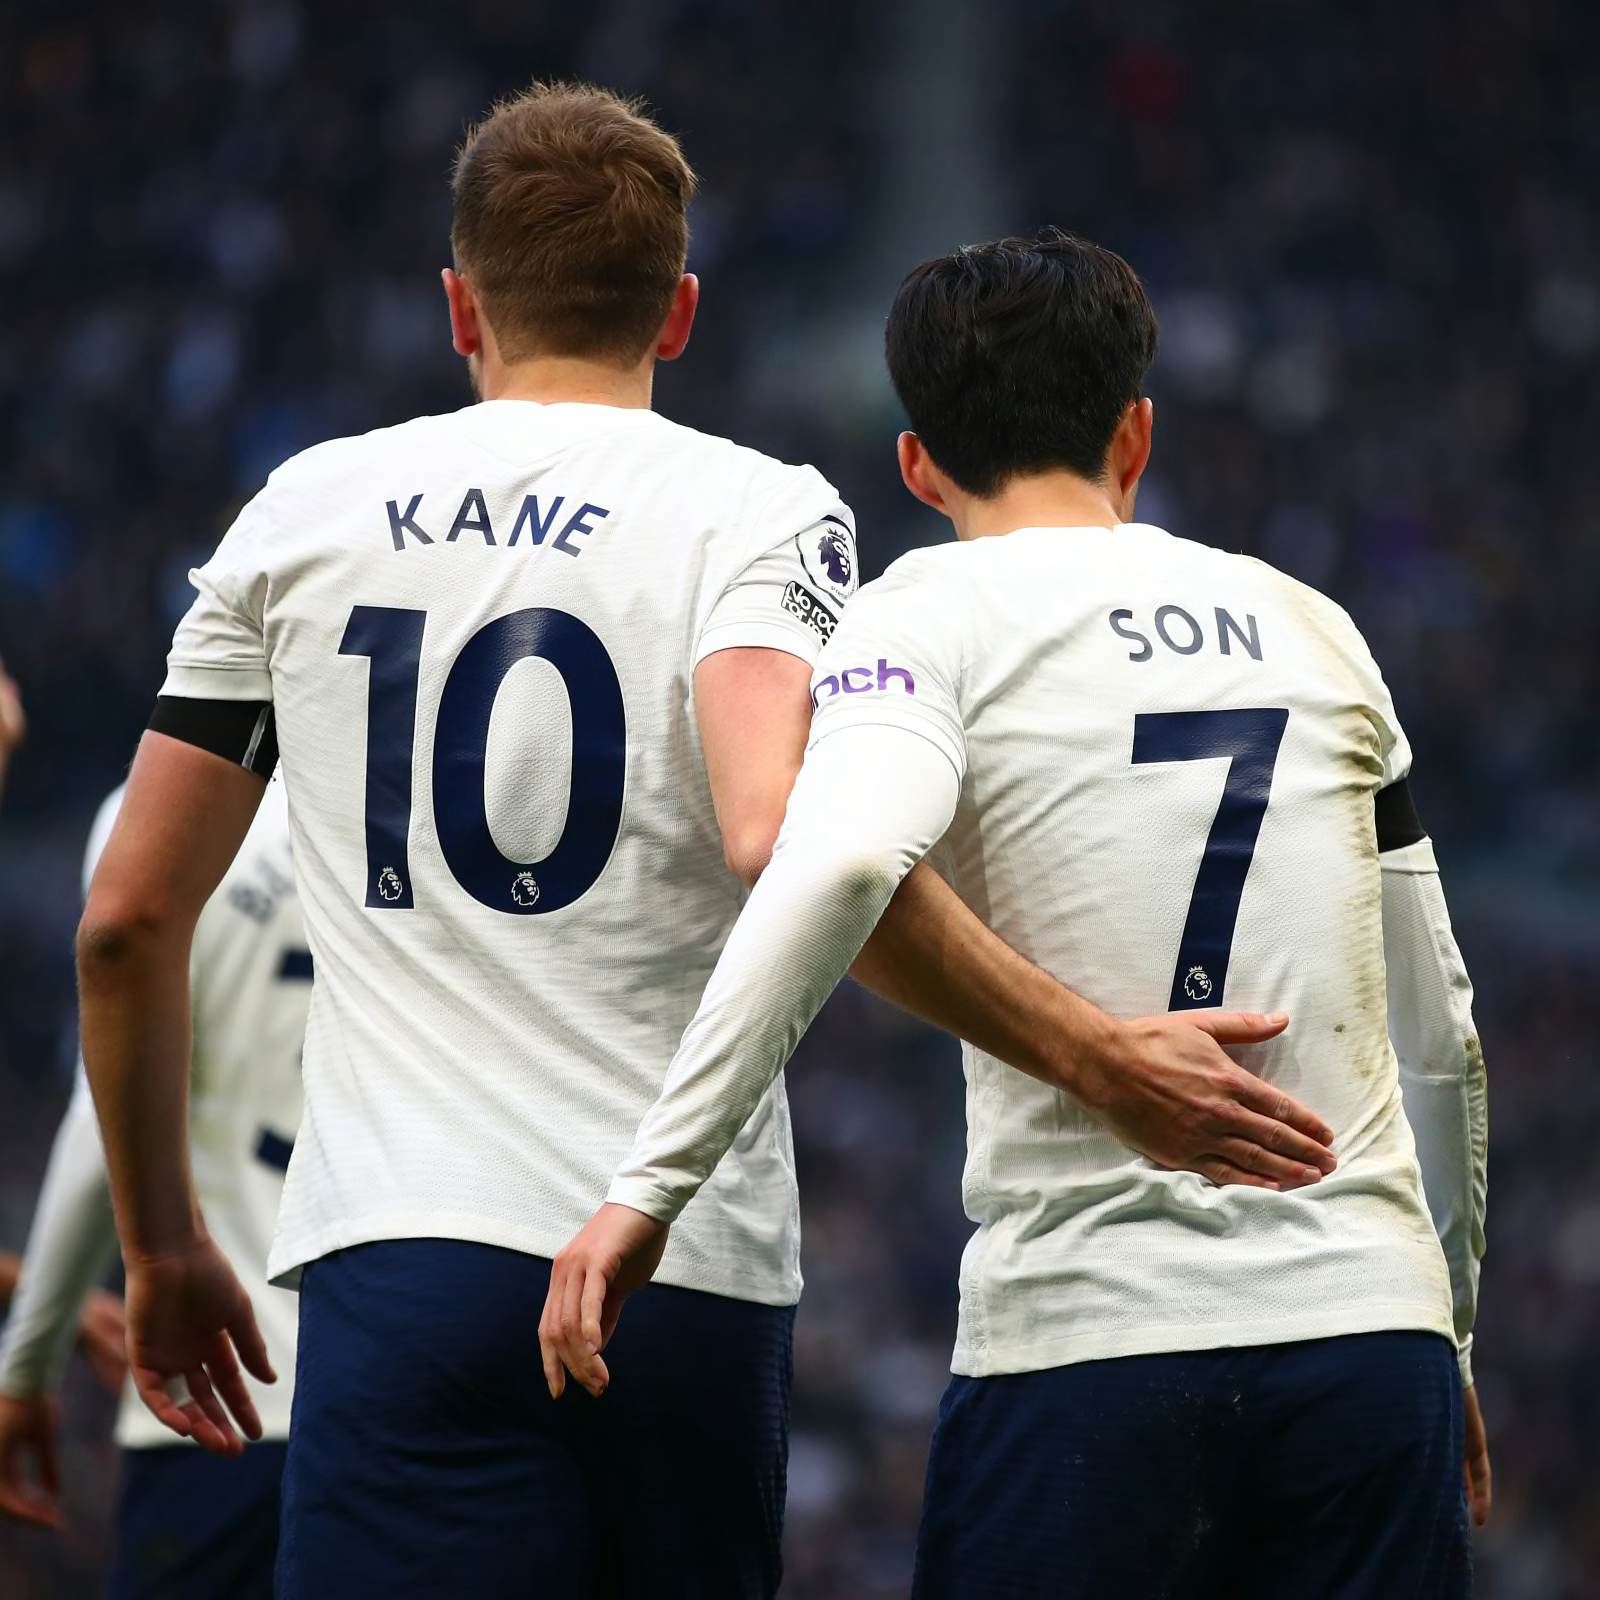 LONDON, ENGLAND - MARCH 20: Heung-Min Son of Tottenham Hotspur celebrates scoring his side's second goal with team-mate Harry Kane during the Premier League match between Tottenham Hotspur and West Ham United at Tottenham Hotspur Stadium on March 20, 2022 in London, England.  (Photo by Chris Brunskill / Fantasista / Getty Images)